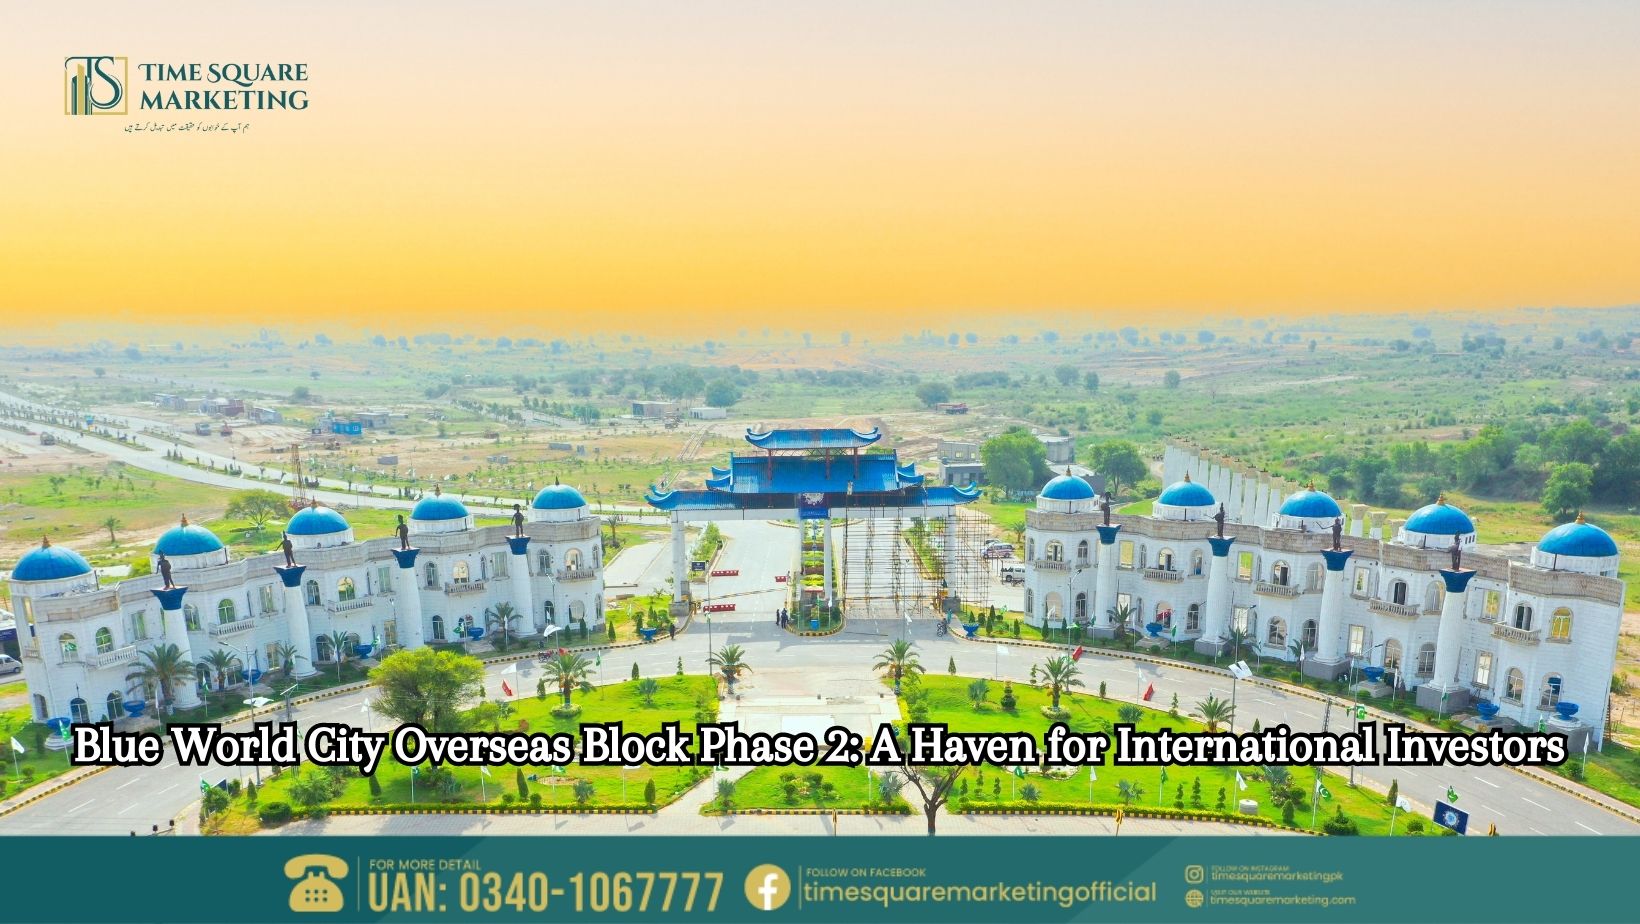 Blue World City Overseas Block Phase 2 A Haven for International Investors